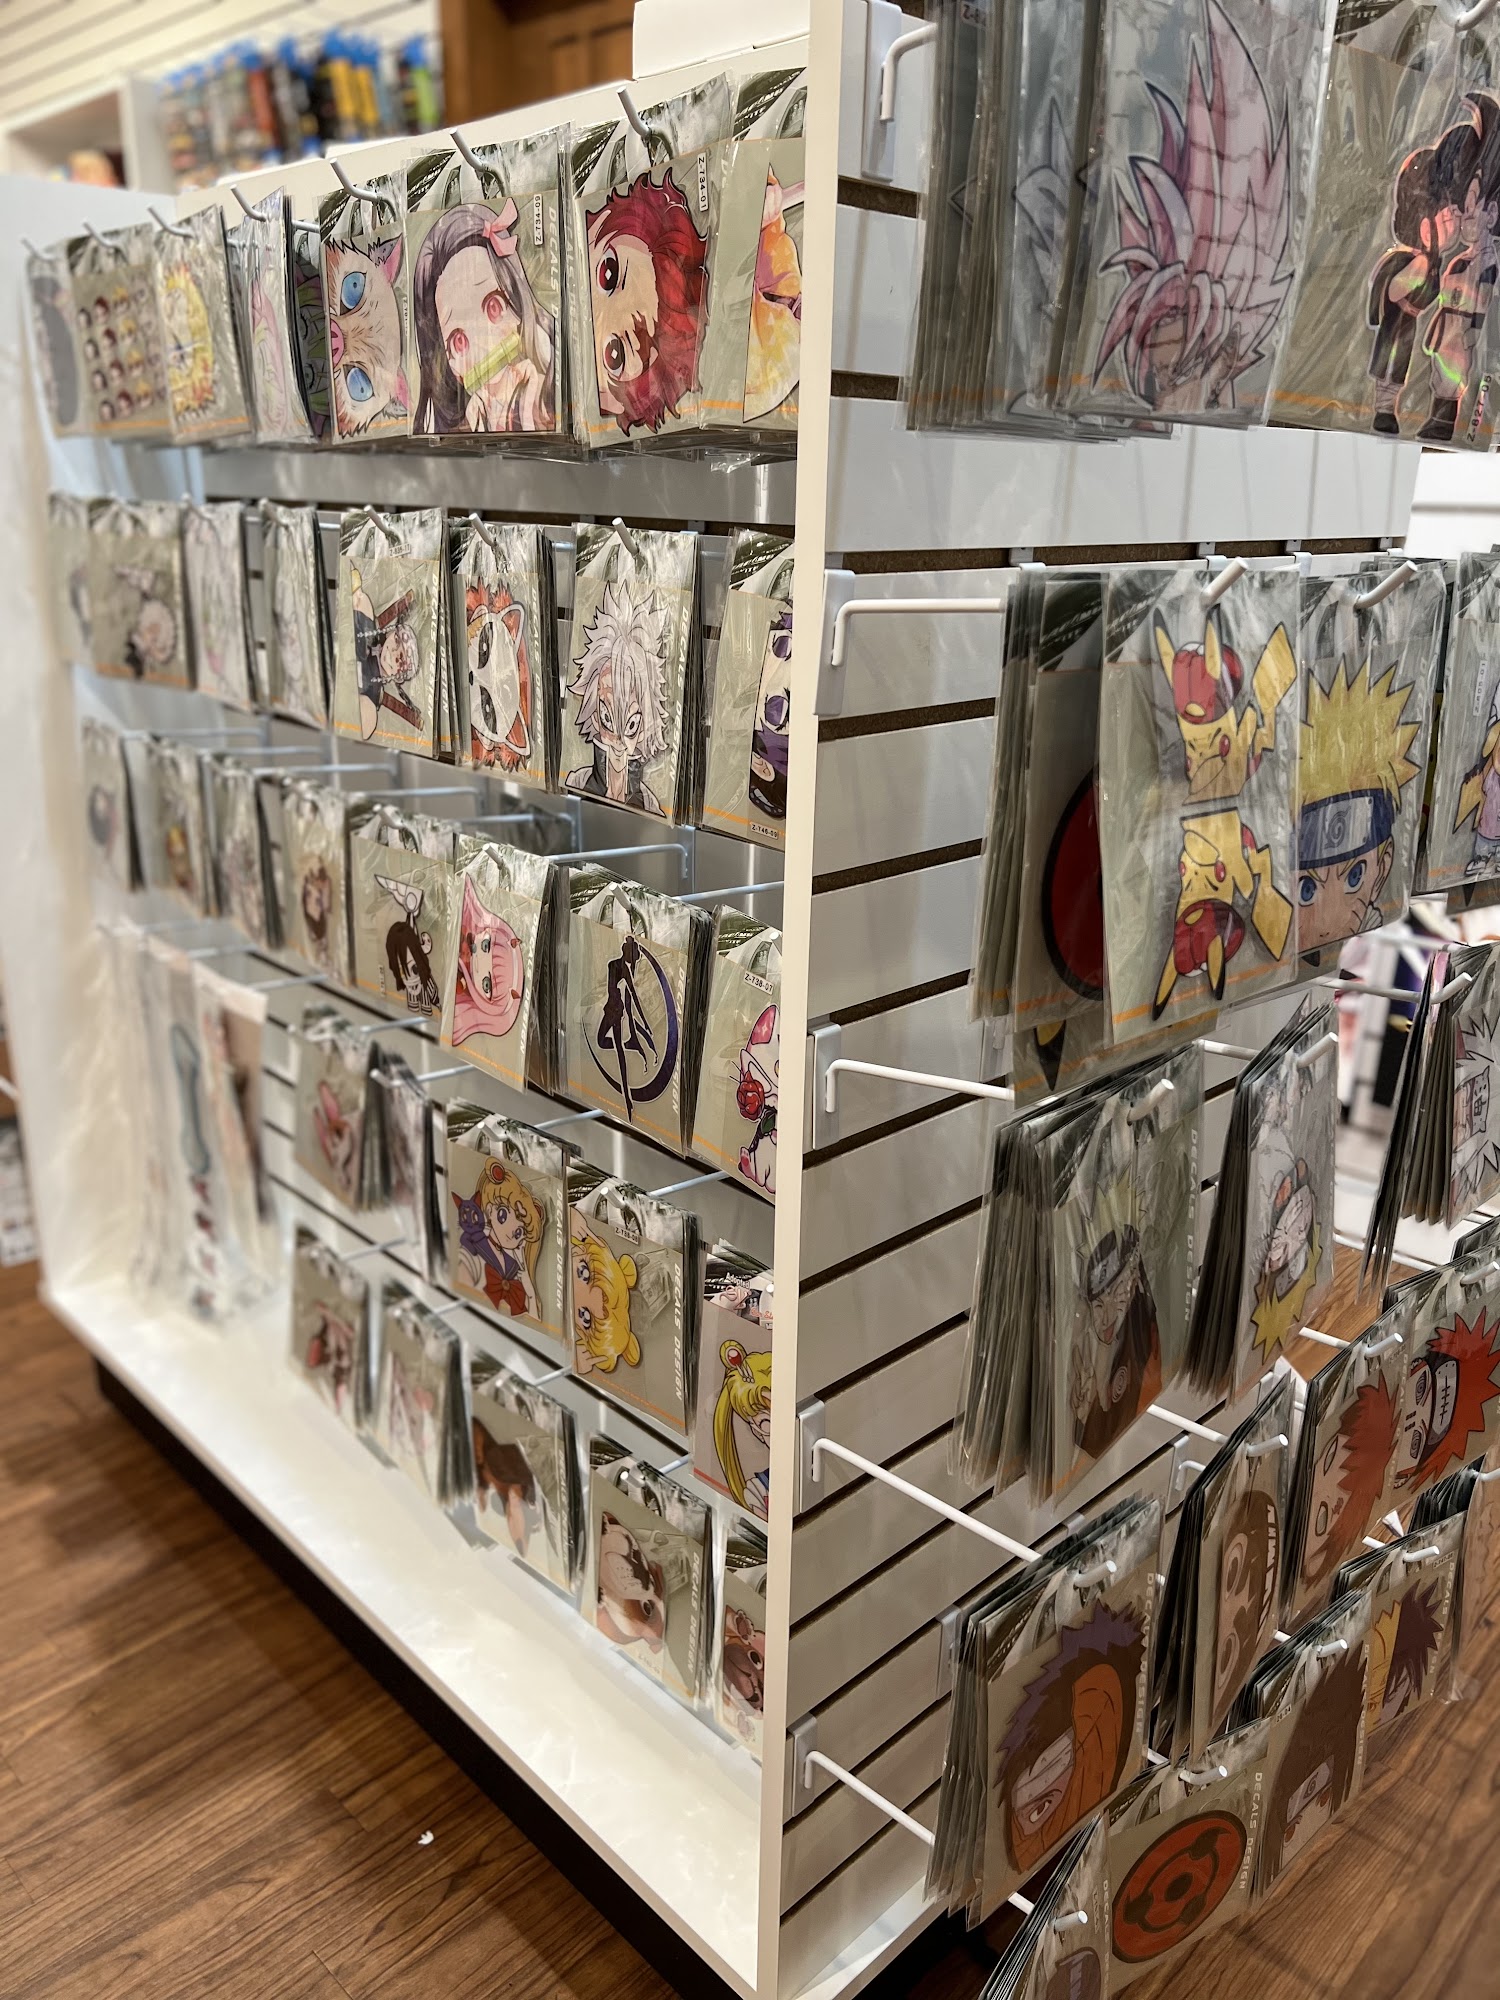 Otaku - Anime, Snacks & Collectibles 1072 Springhill Rd Mall #1564, West Dundee Illinois 60118